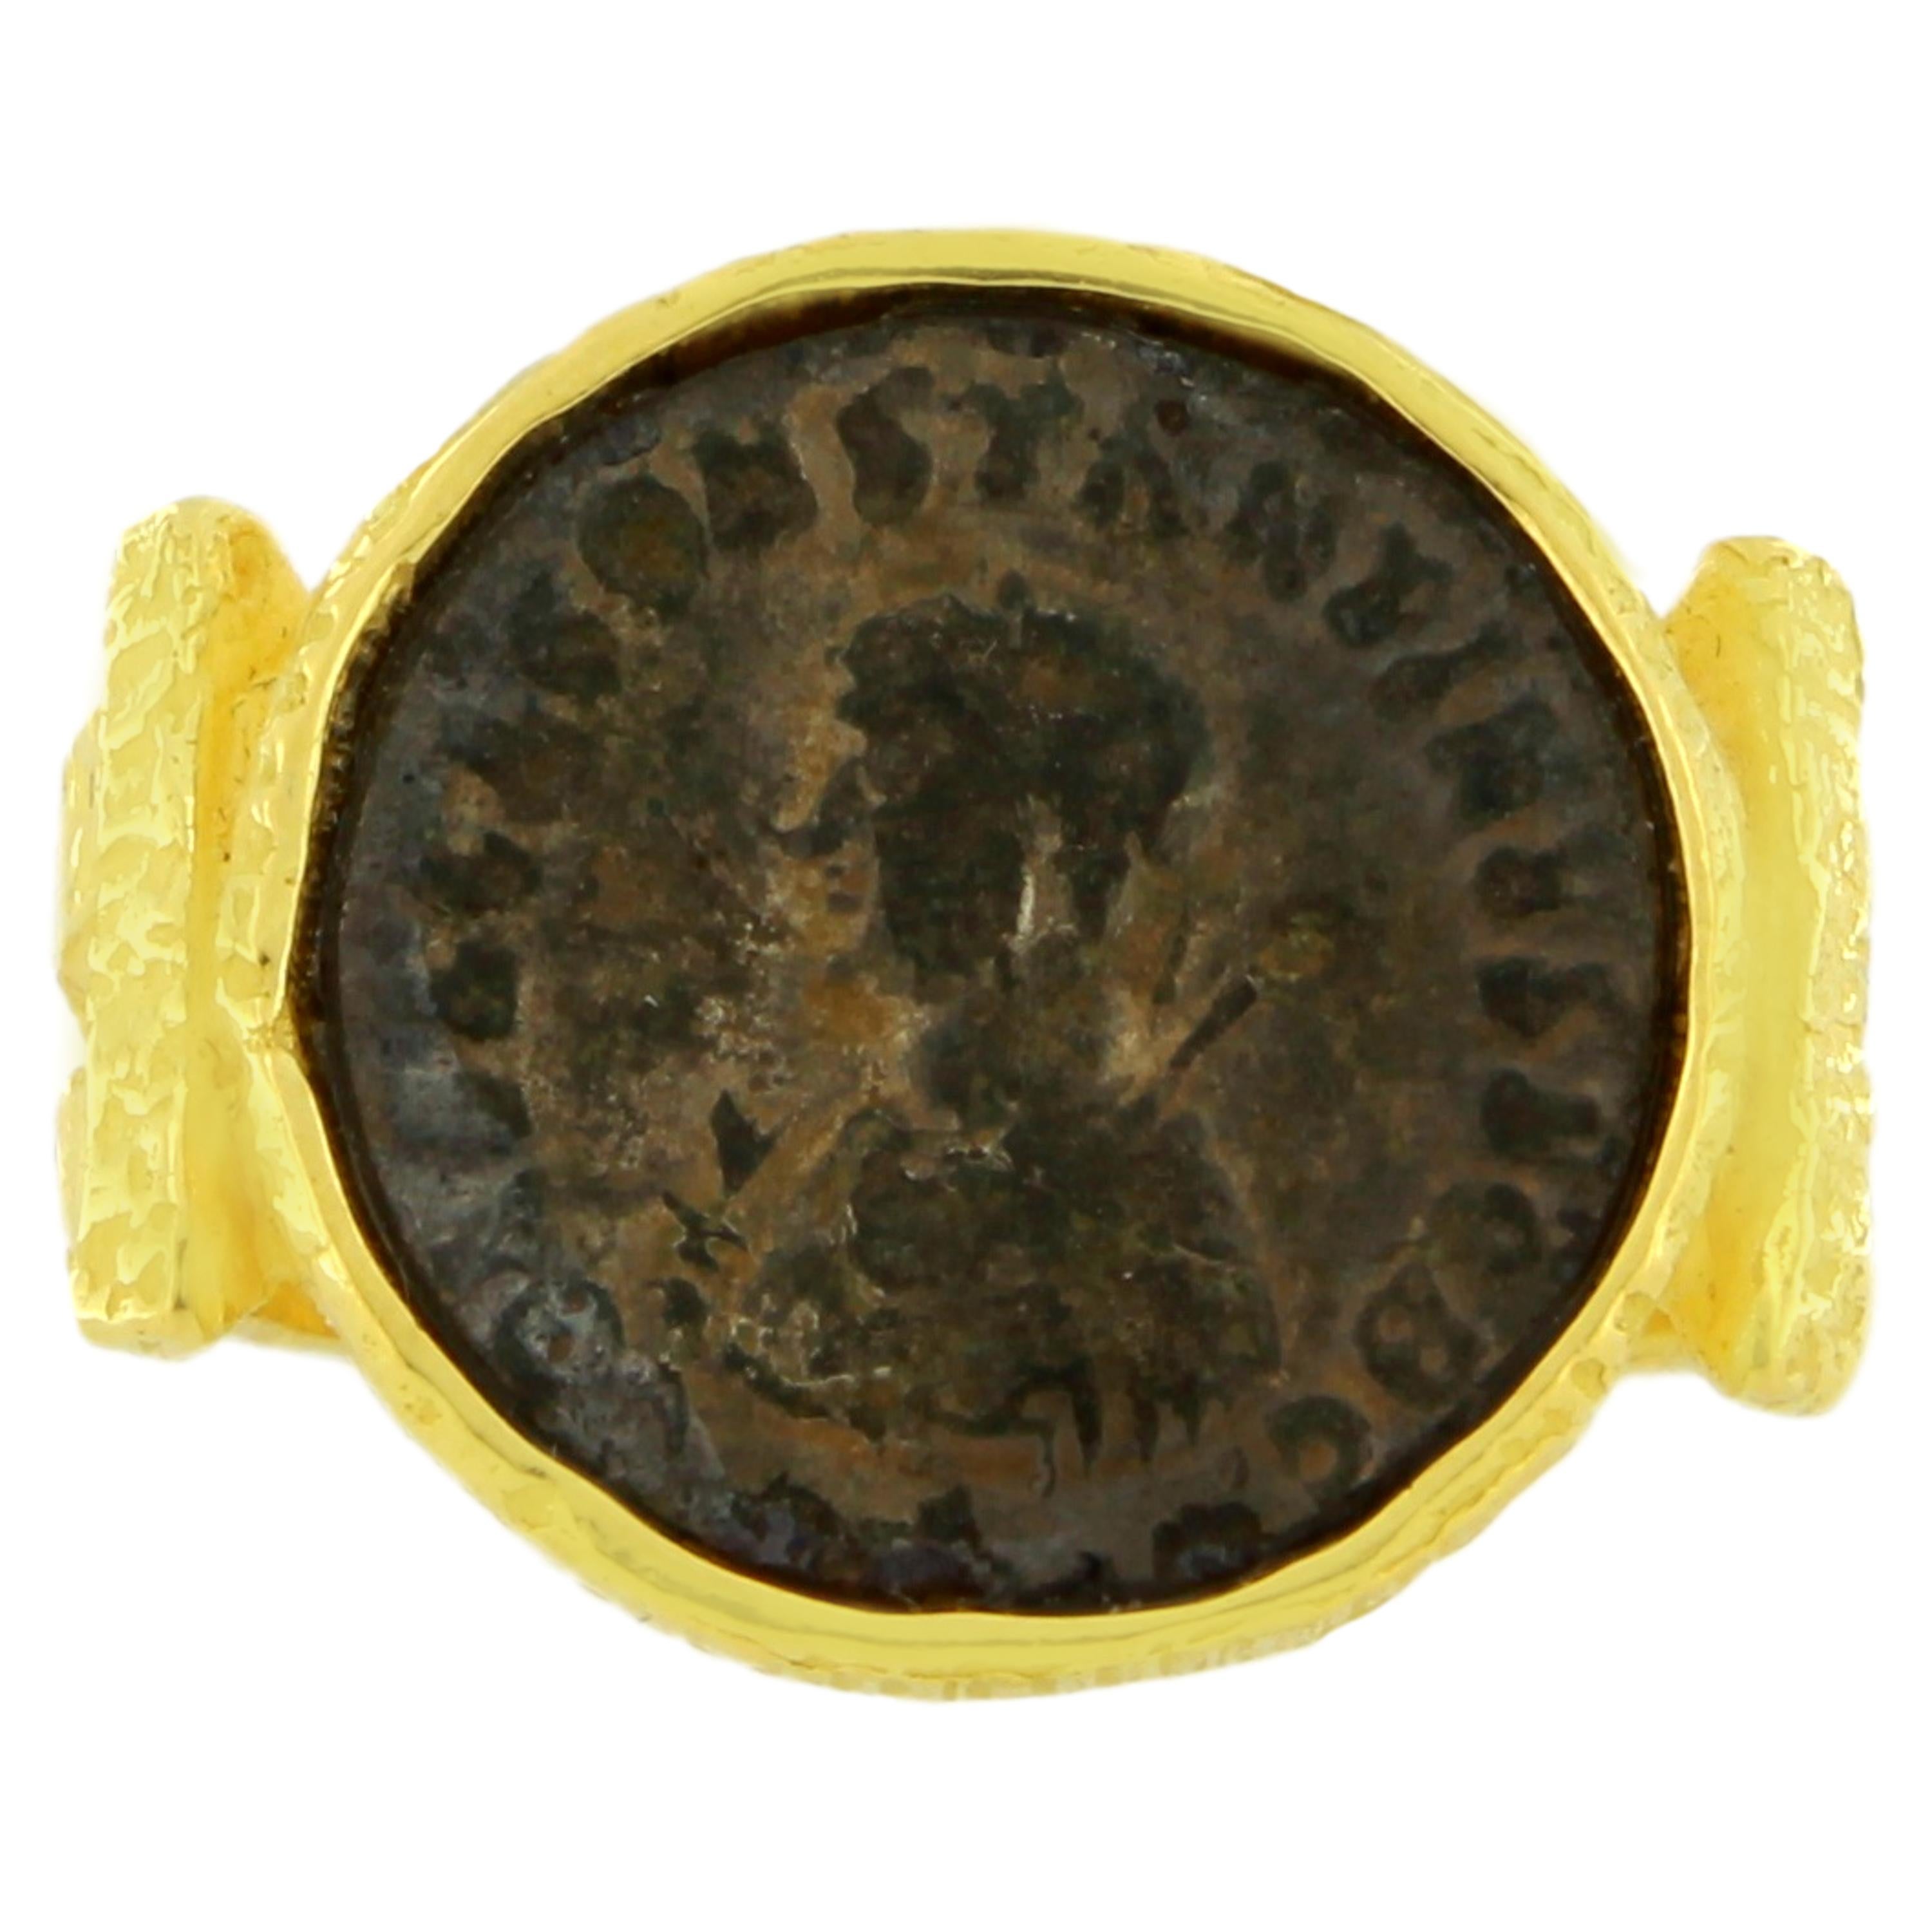 Ancient Roman Coin Ring in Satin Yellow Gold, from Sacchi’s 